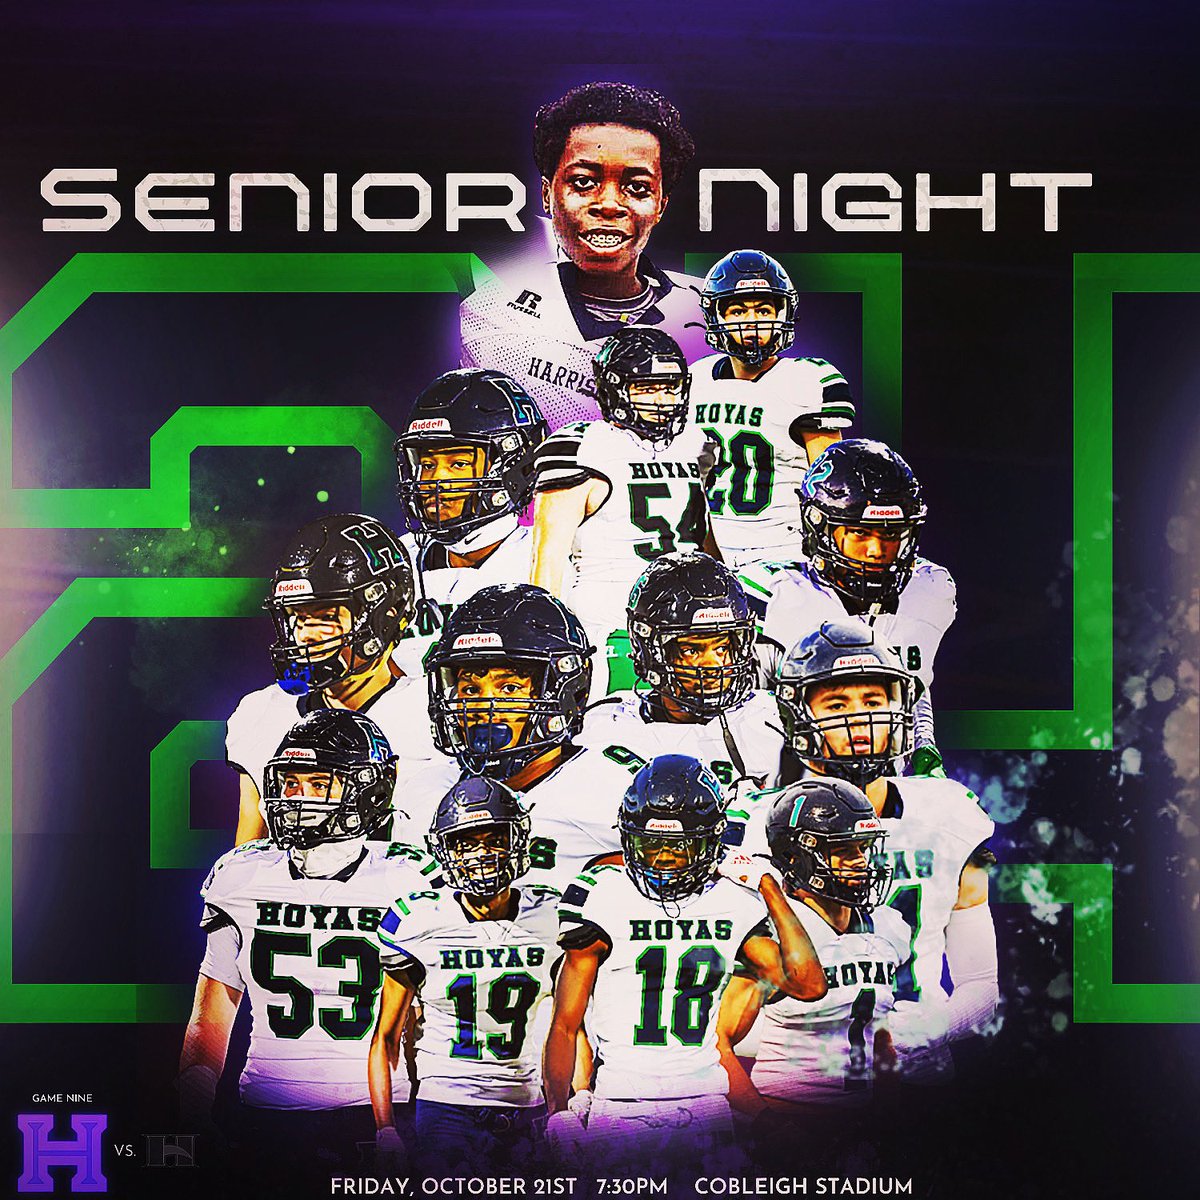 Tomorrow night we celebrate our seniors in #CobleighStadium 👏👏👏👏 come out & pack those stands as we battle region for Hillgrove #RockSolid #HoyaSaxa #CloseTheGap